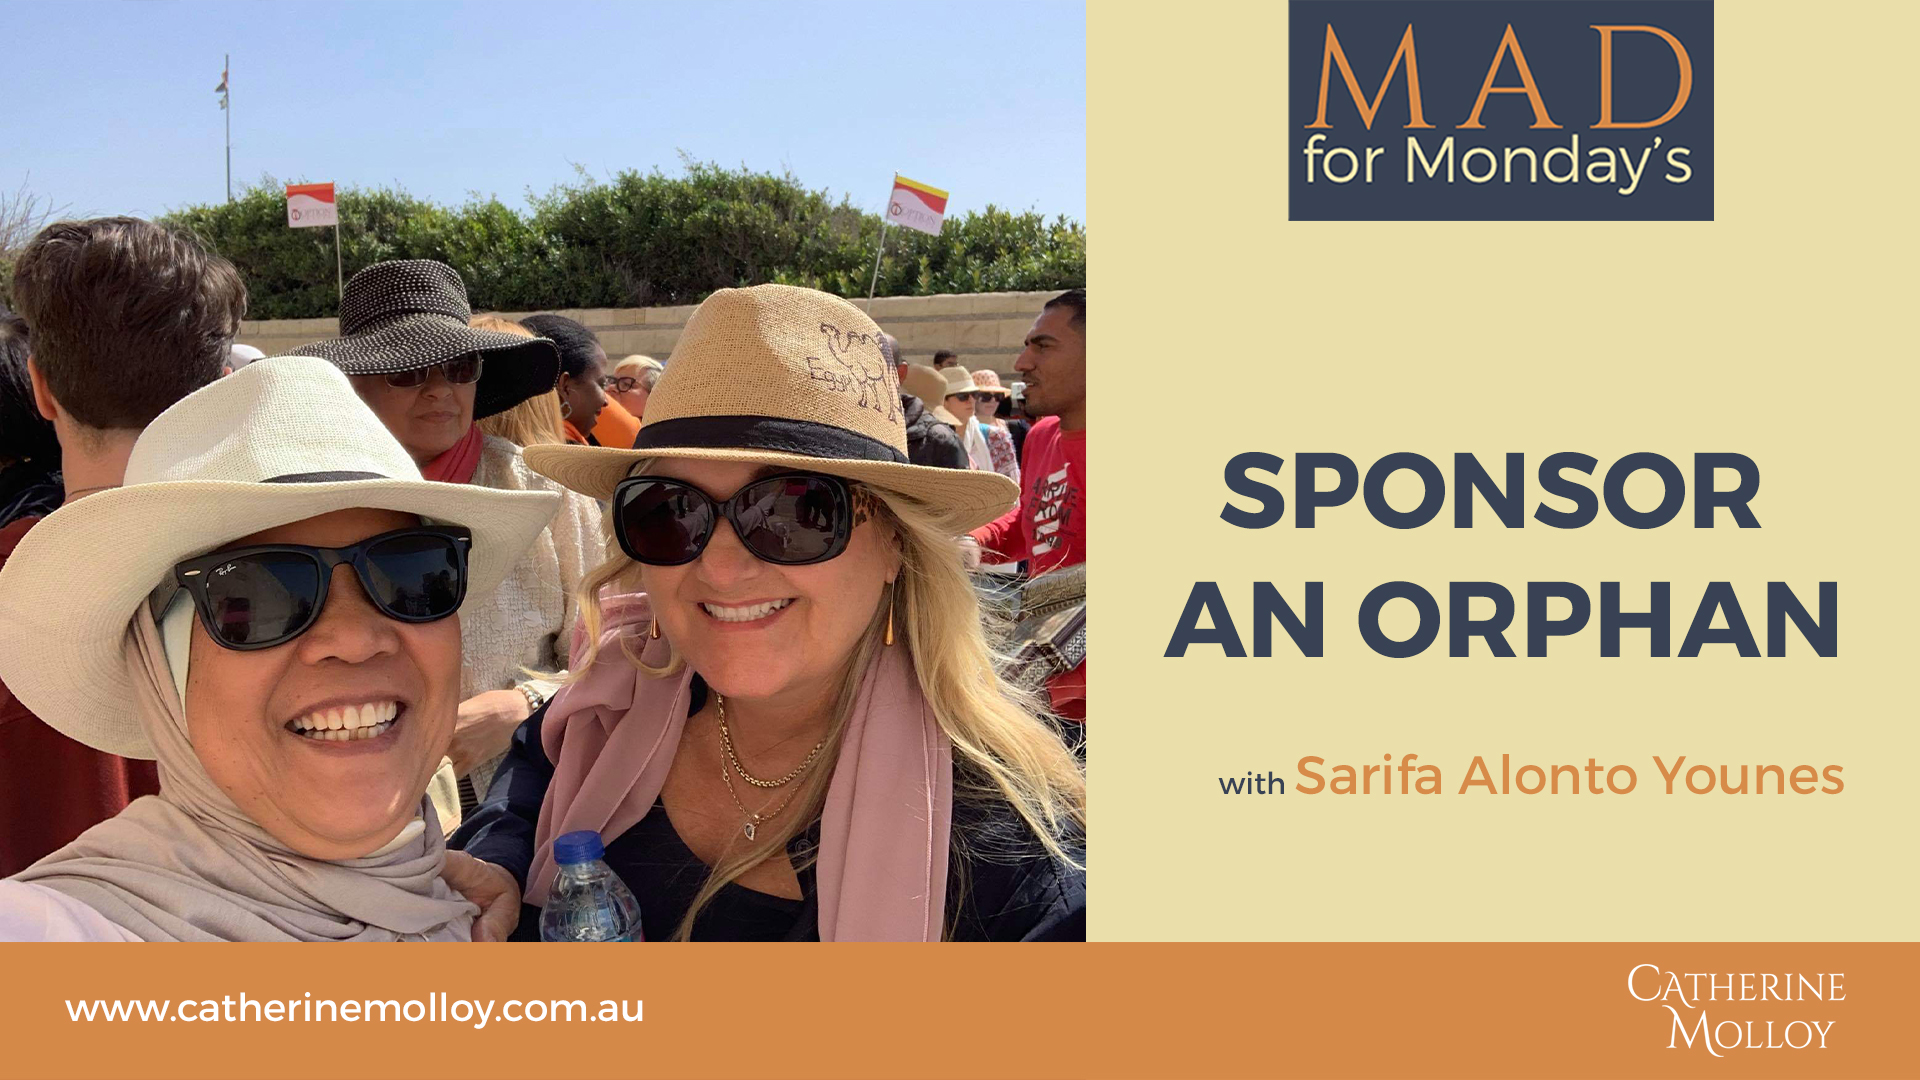 MAD for Monday’s – Sponsor an Orphan